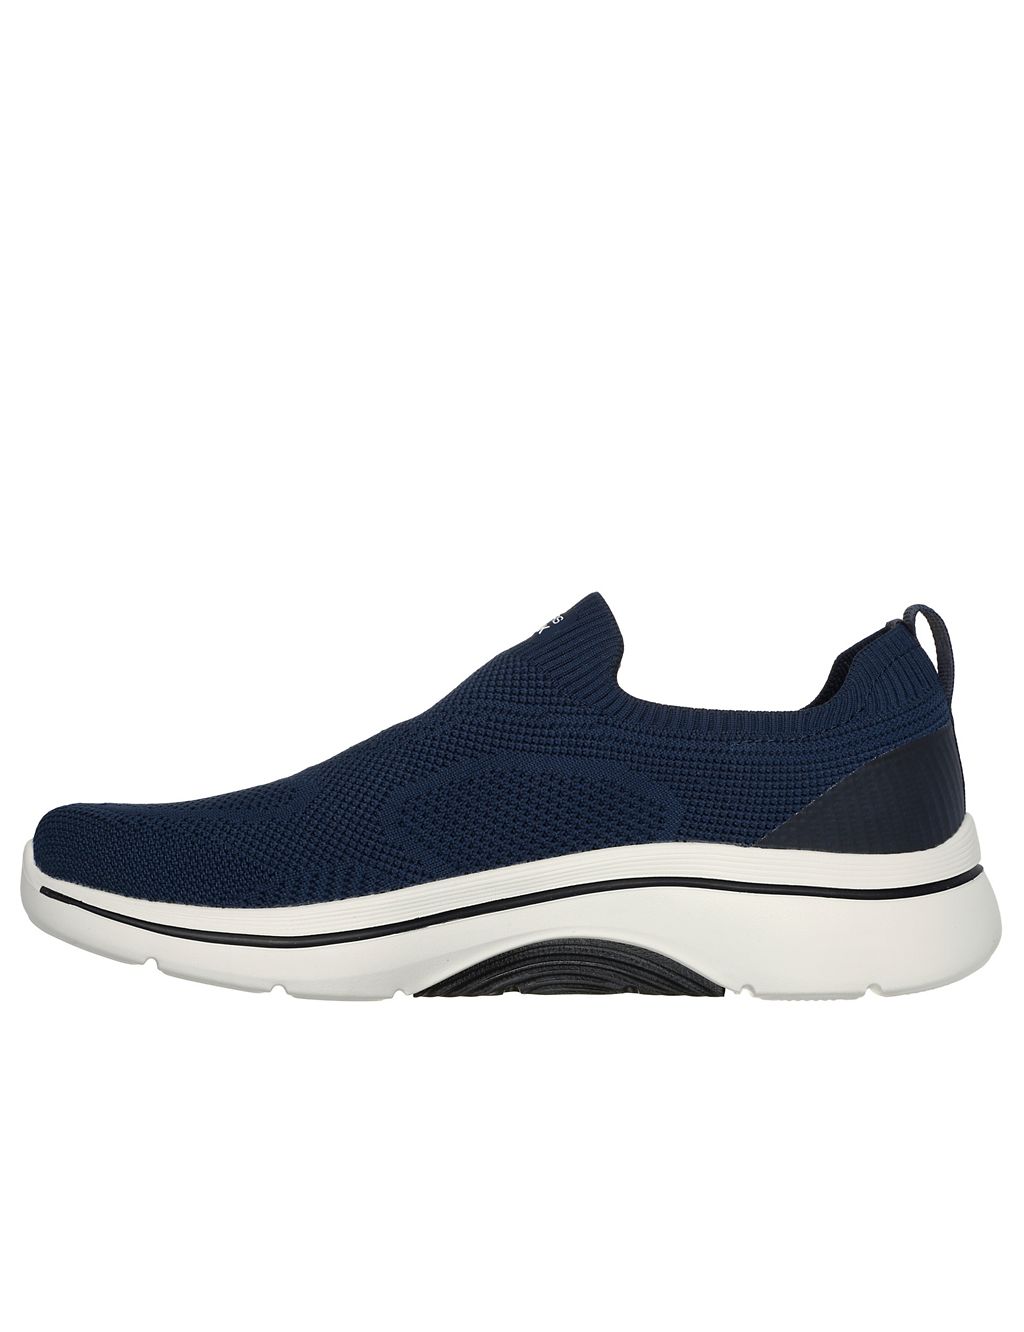 Go Walk Arch Fit 2.0 Slip-On Trainers 1 of 4